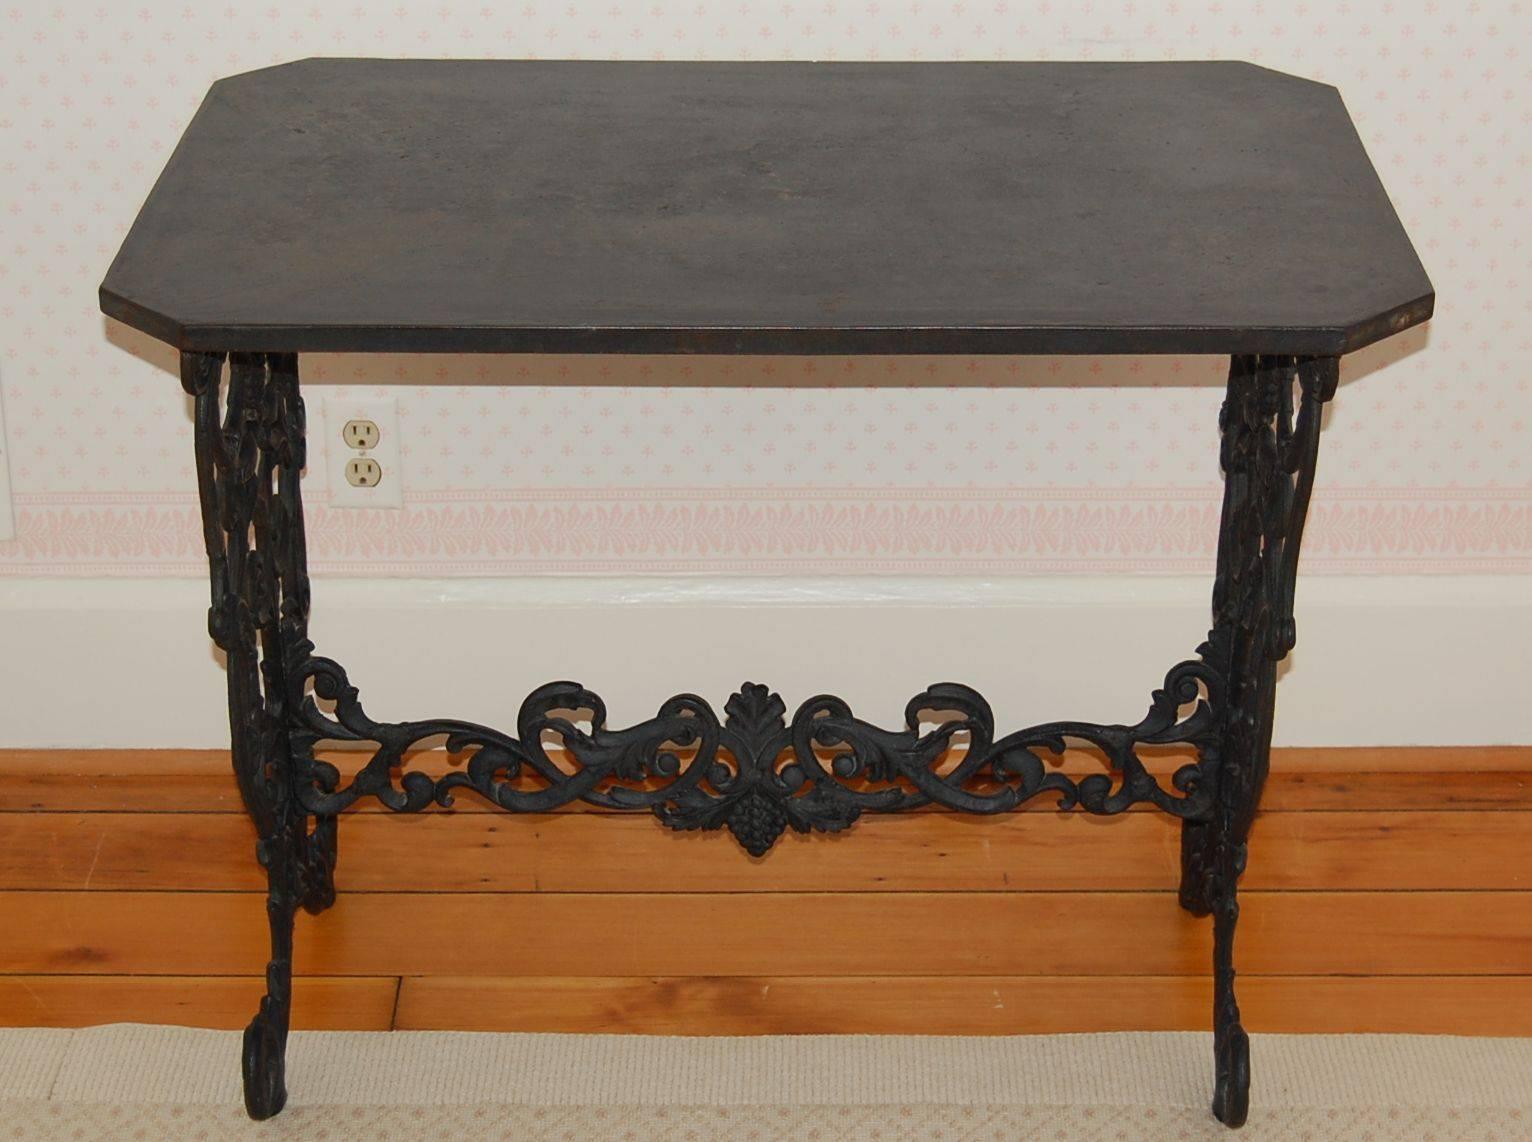 Elaborate cast iron table base with the original cast iron top in black painted finish circa 1870. The base consists of wonderful upturned eagles heads, grapes and other birds.